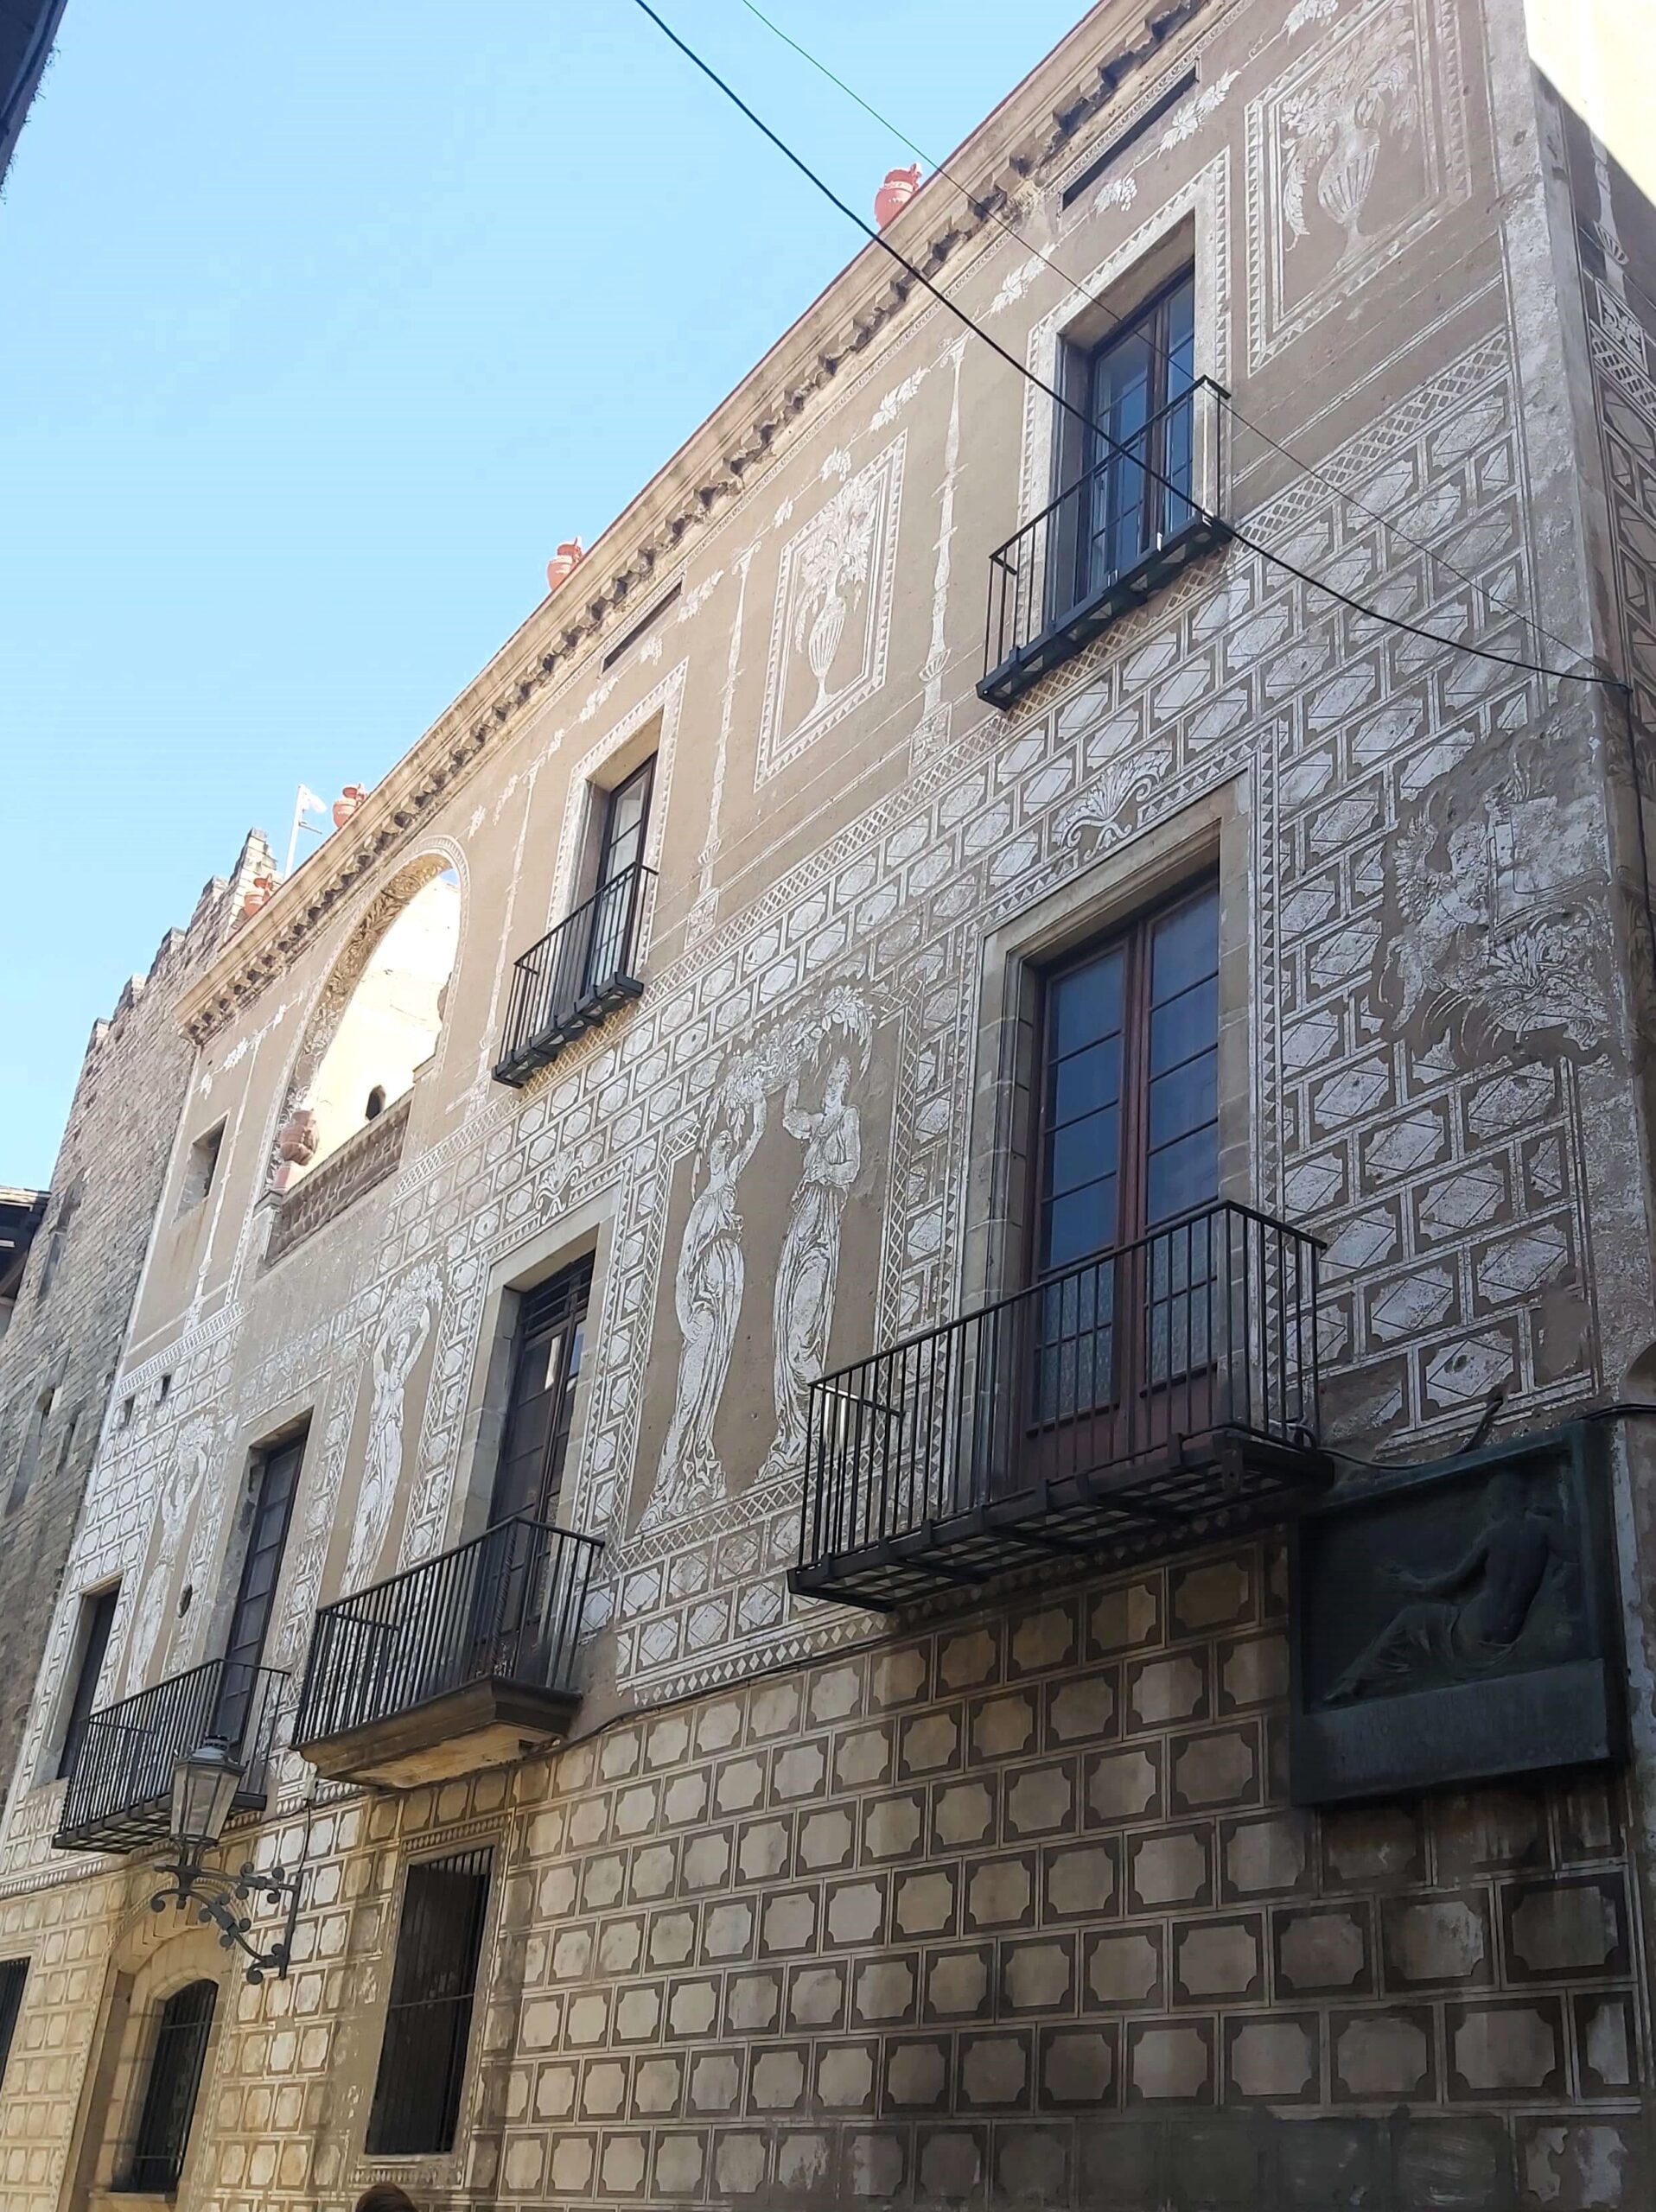 A decorated building in brown and cream tones in Barcelona, Spain